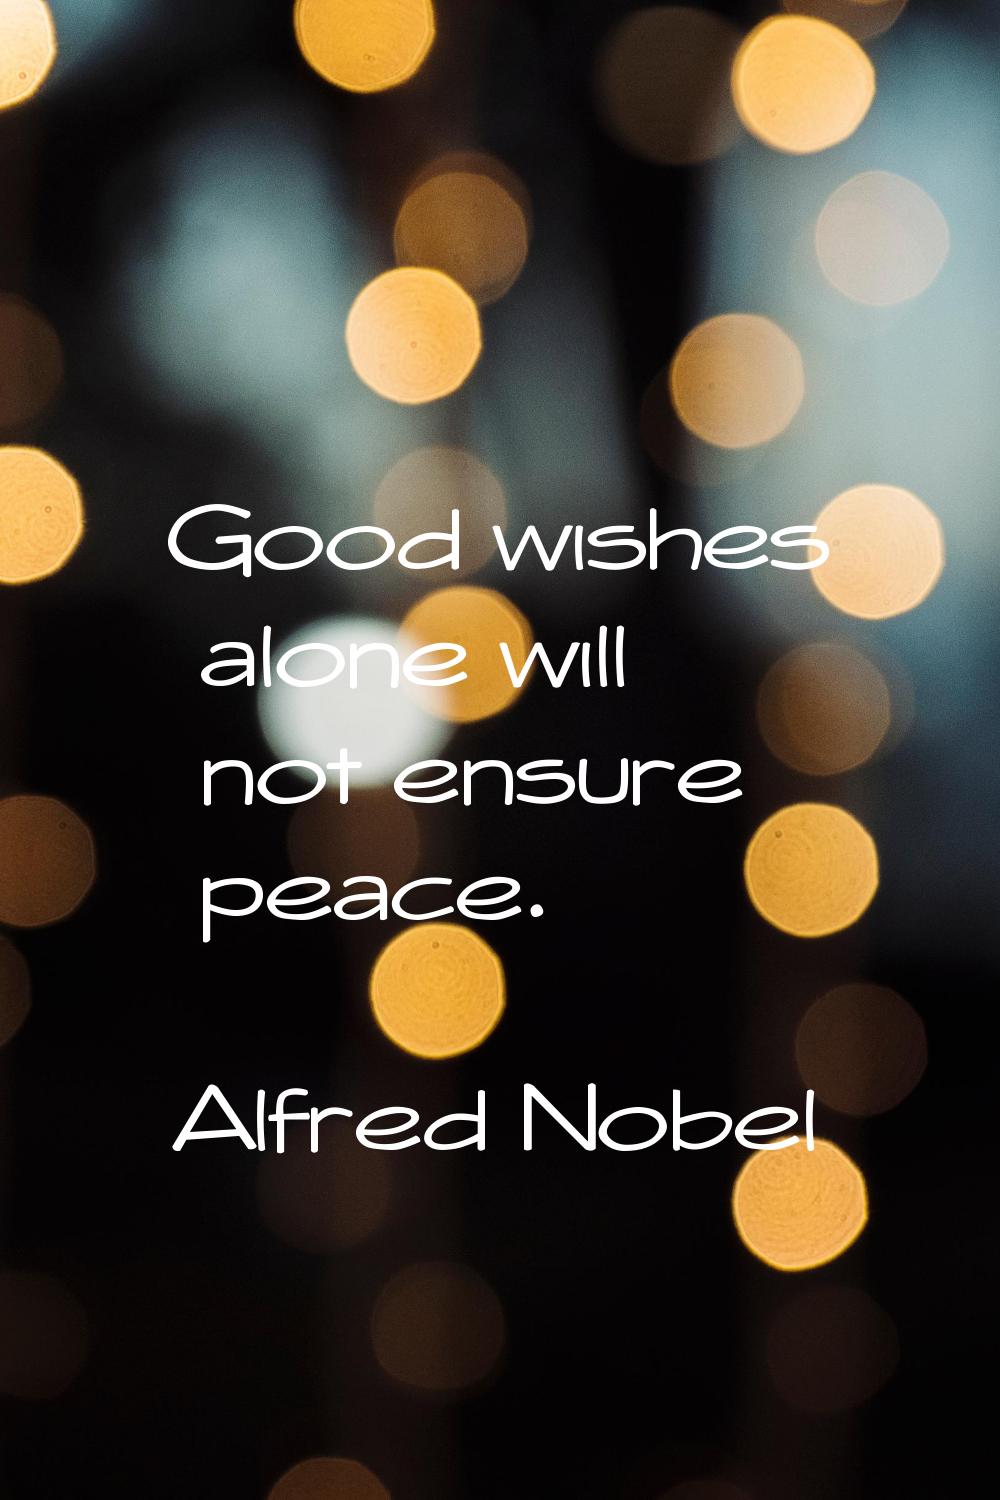 Good wishes alone will not ensure peace.